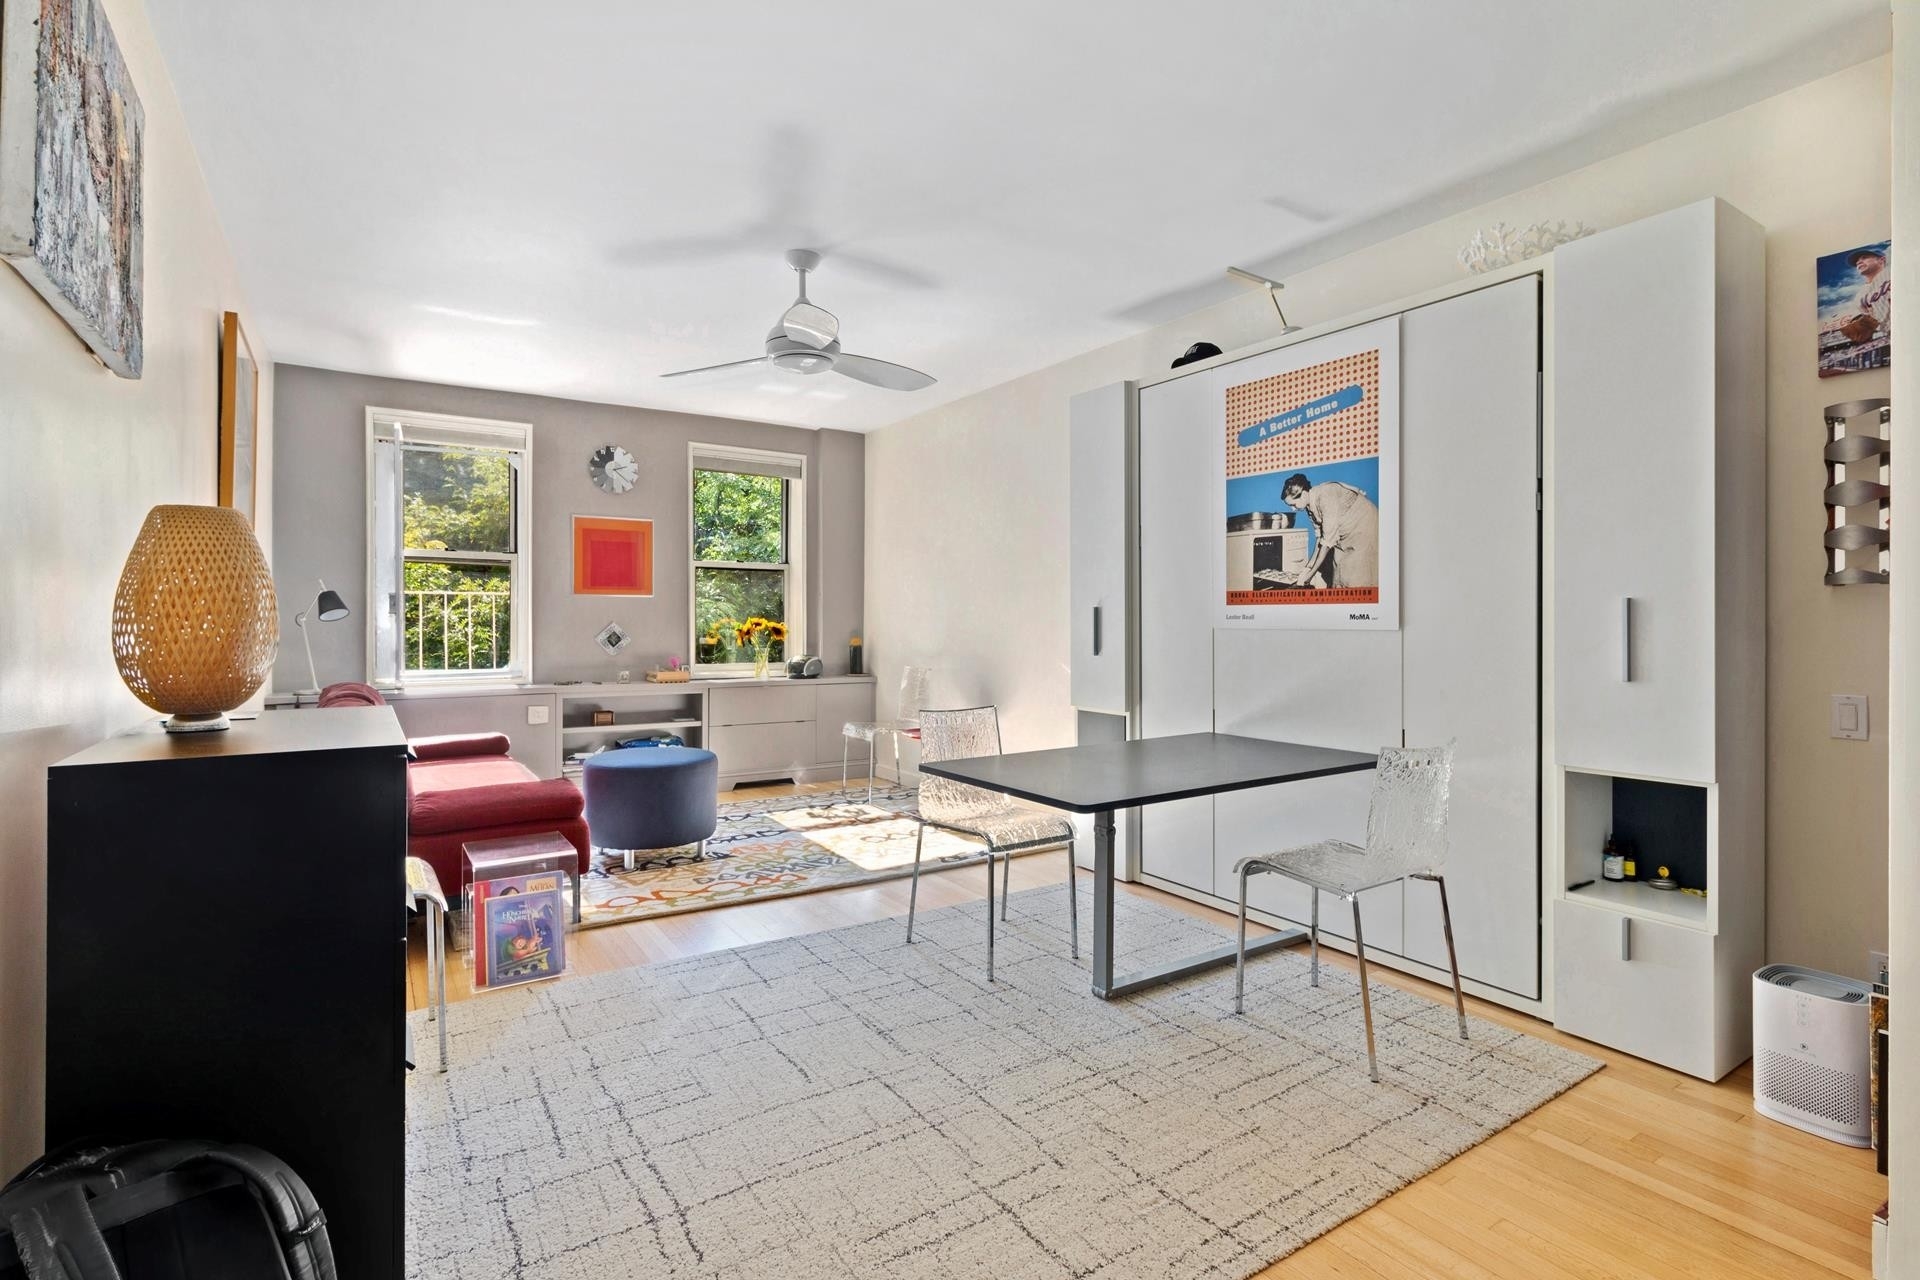 Co-op Properties for Sale at 225 E 76TH ST, 3D Lenox Hill, New York, New York 10021